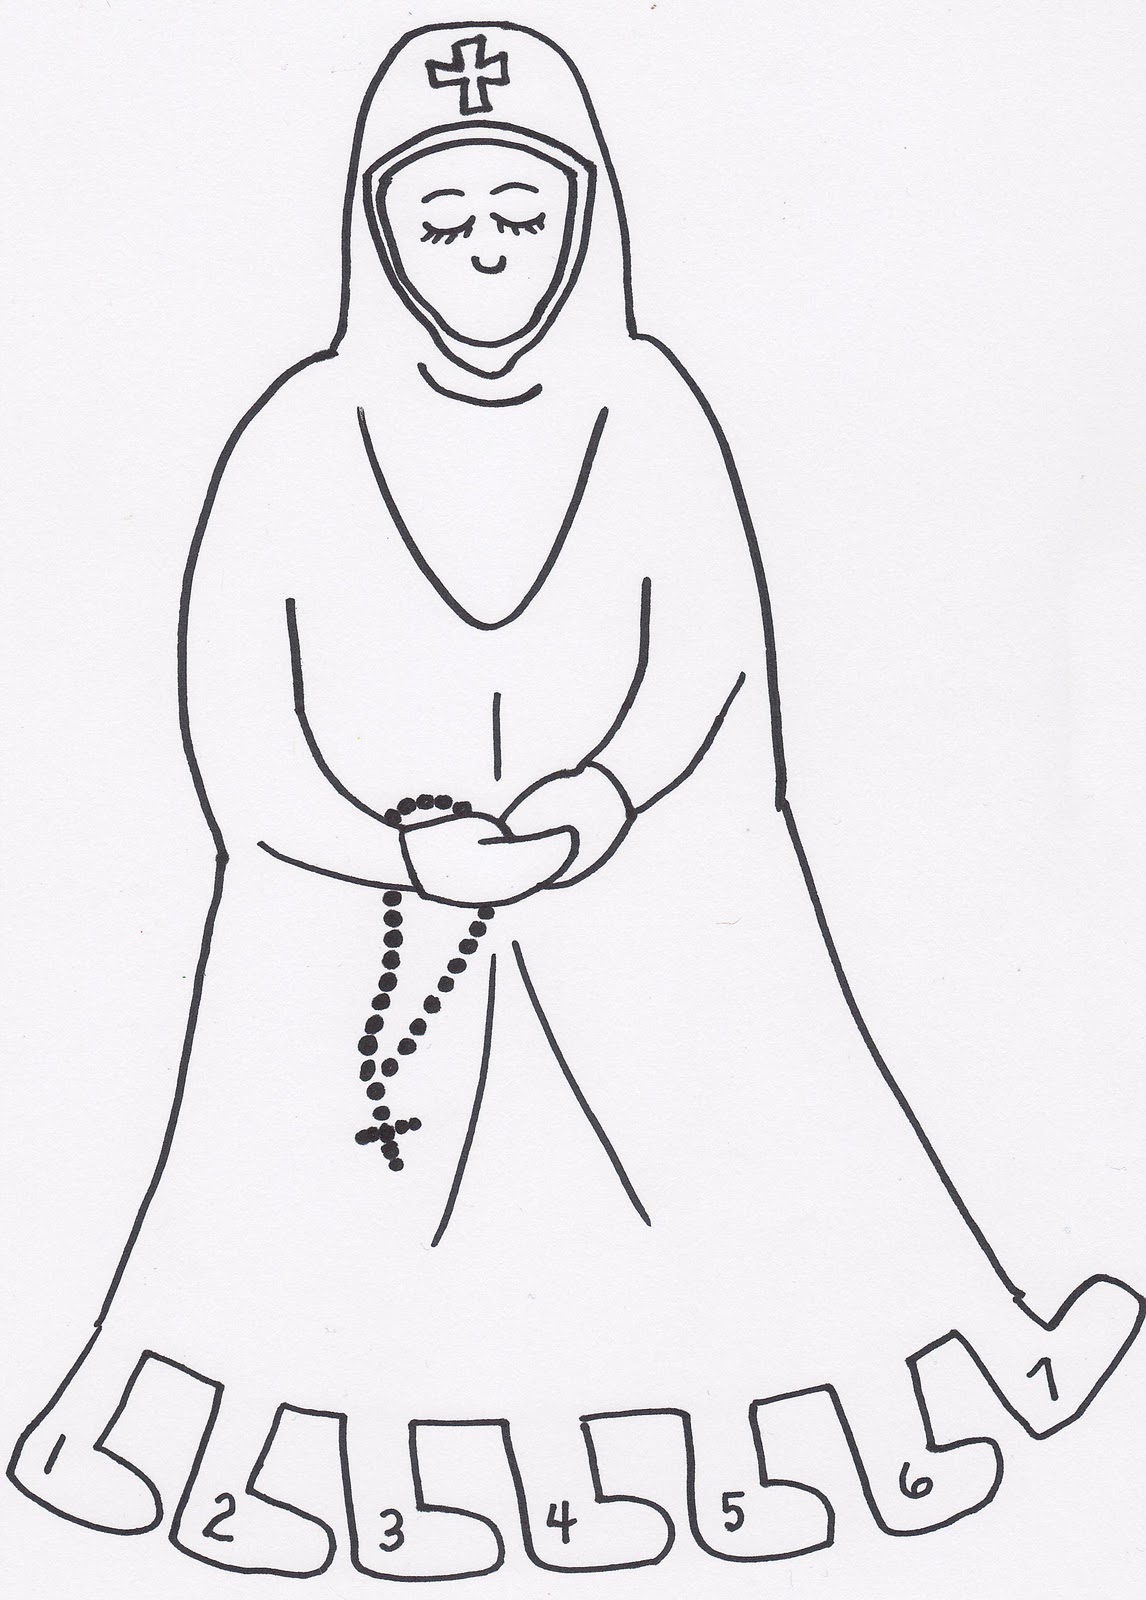 Lady Sarakosti Poem & Coloring for Great Lent